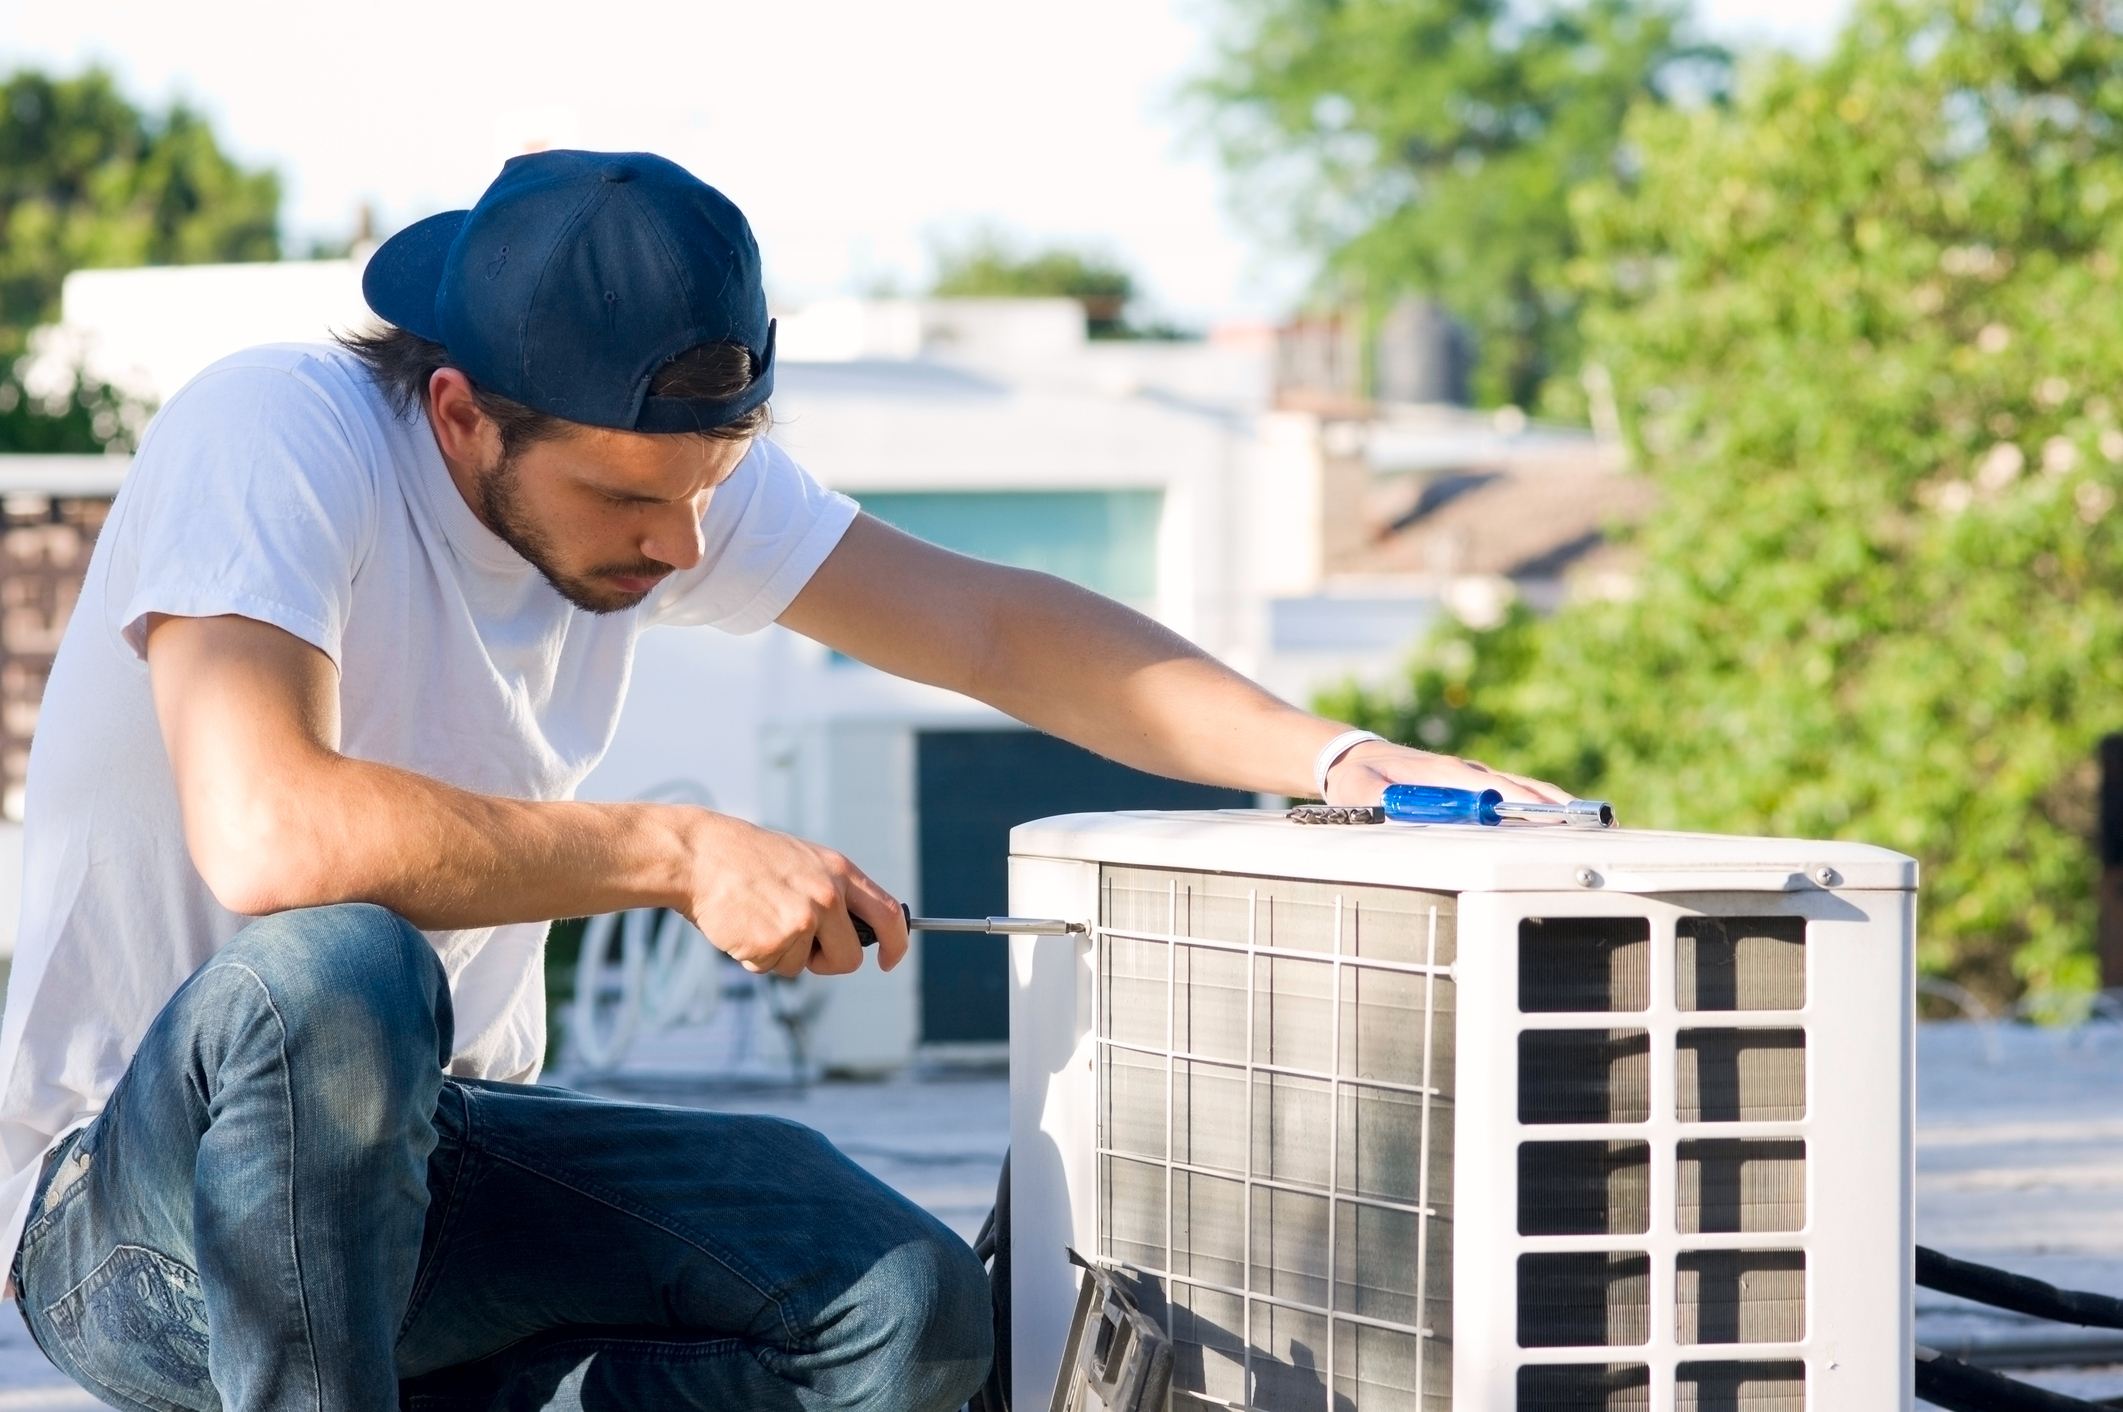 Serviceman inspecting a heat pump on a commercial roof